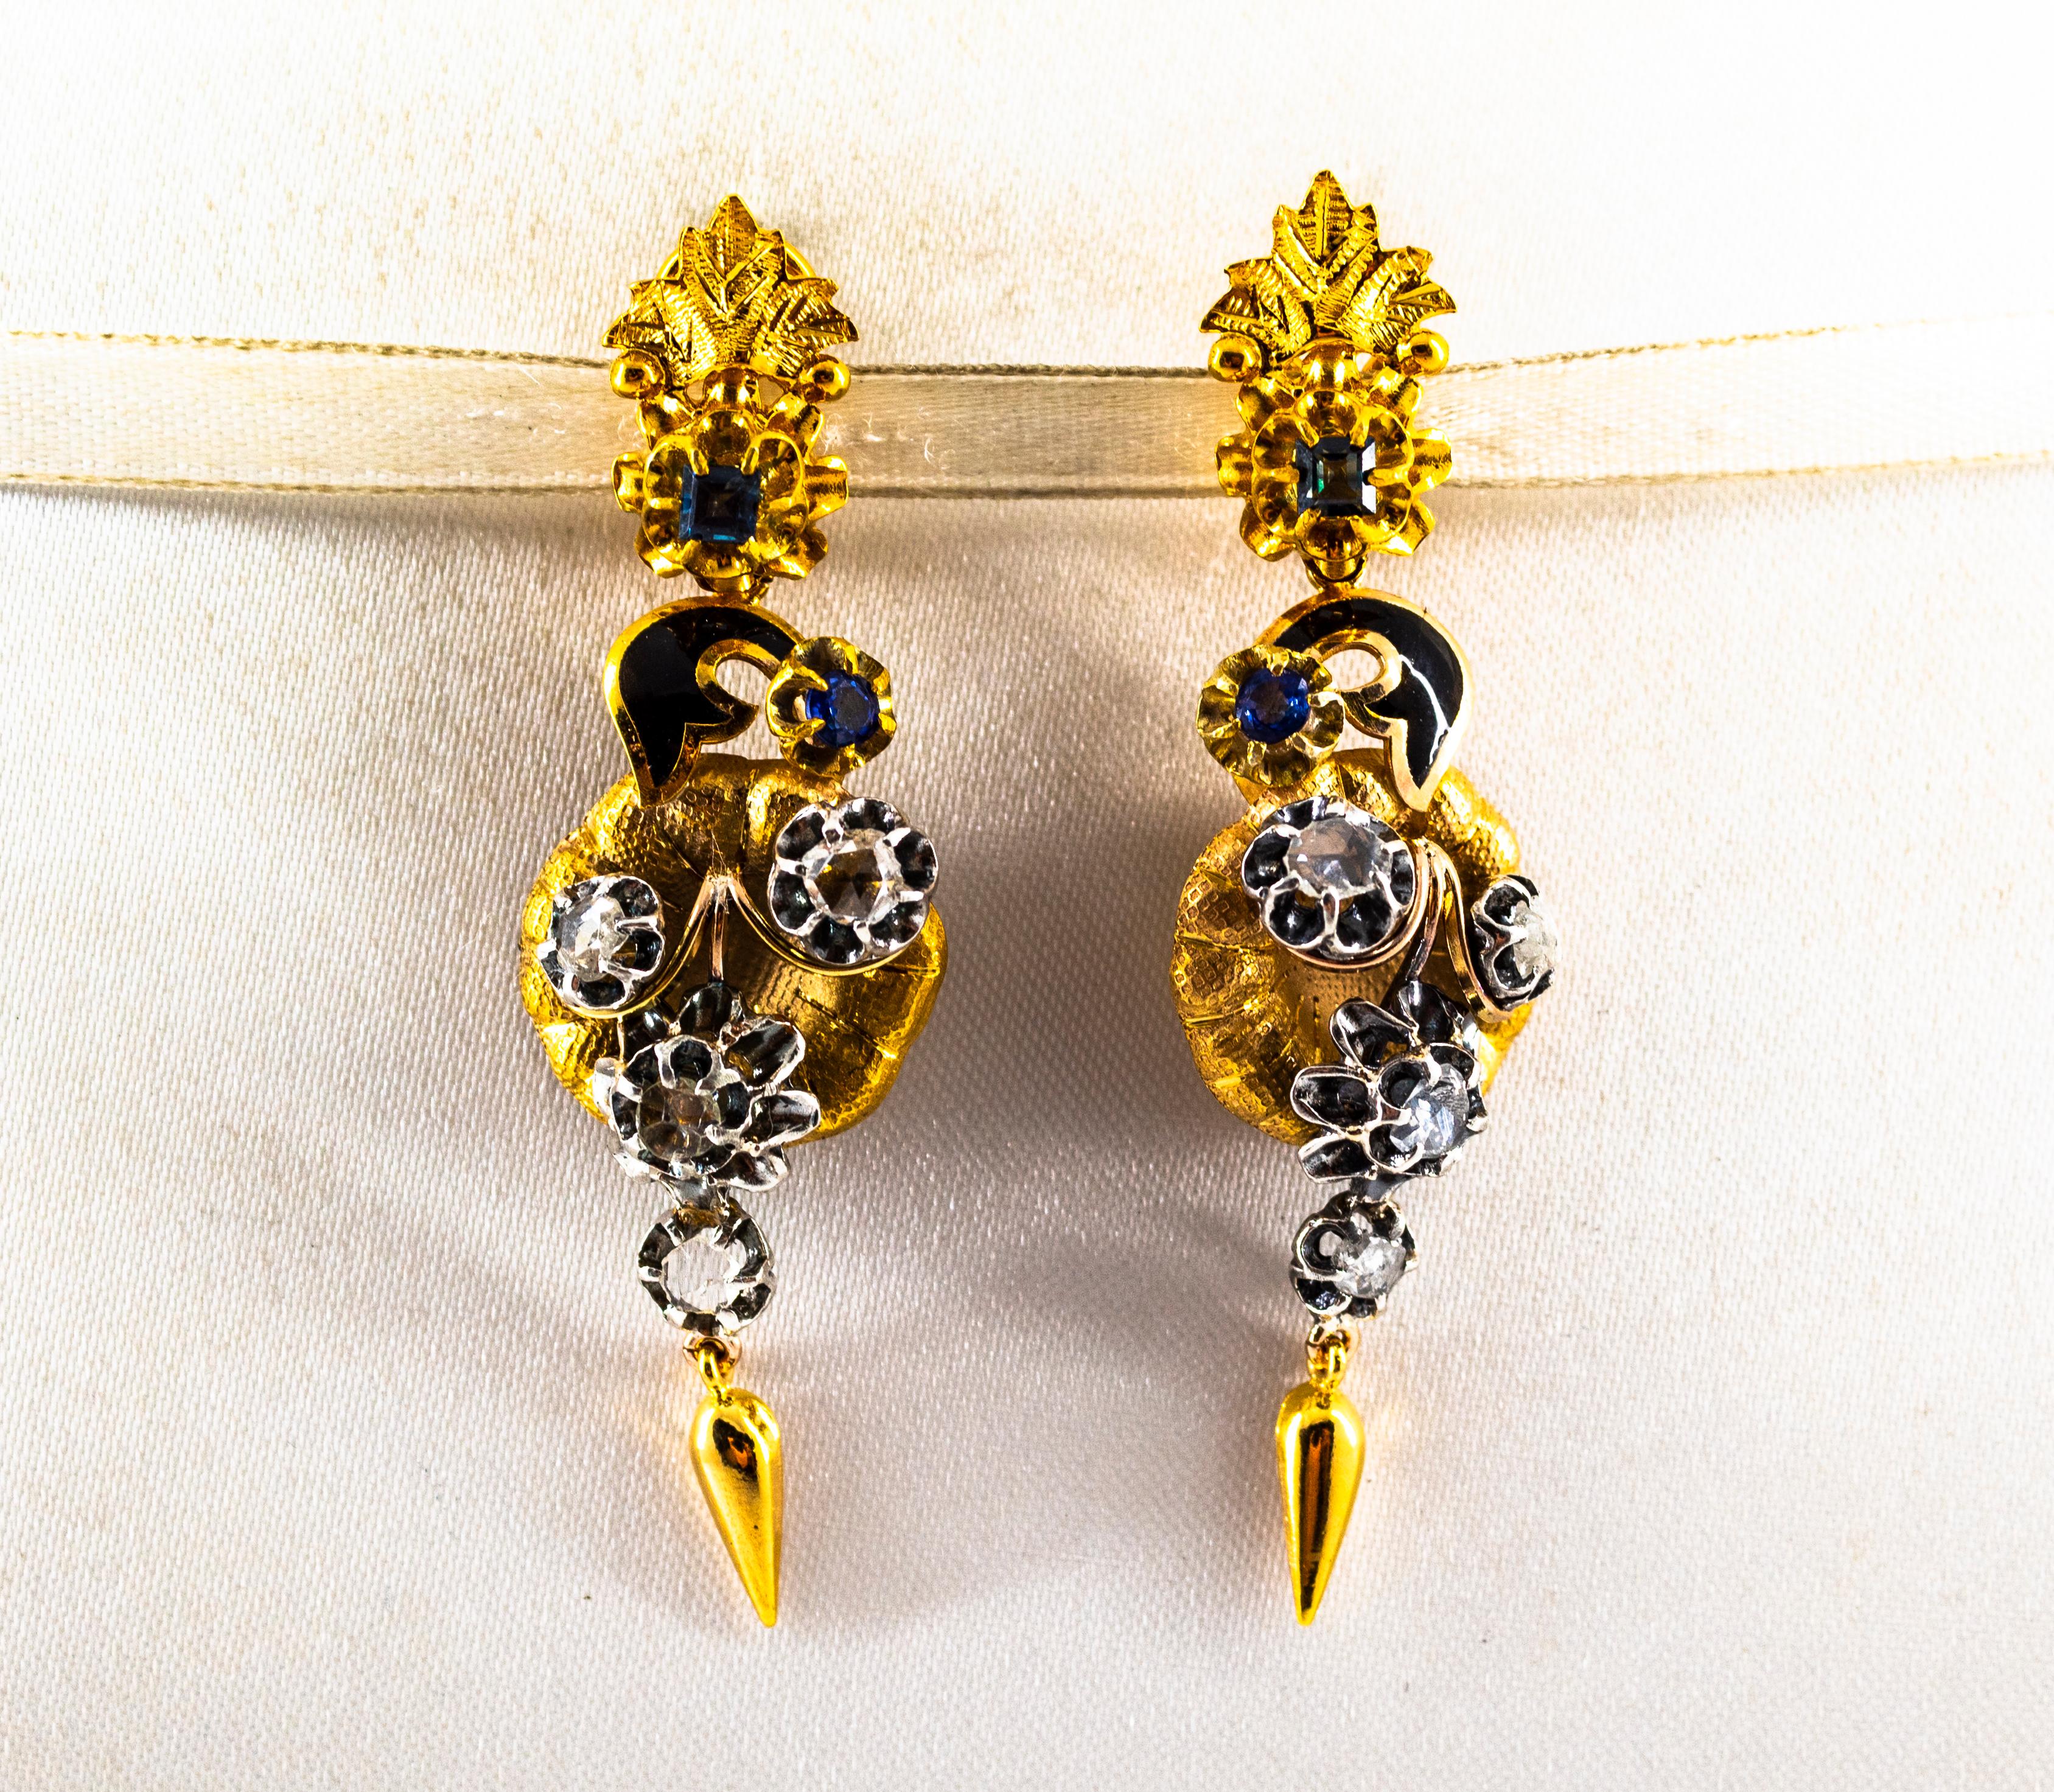 These Earrings are made of 9K Yellow Gold and Sterling Silver.
These Earrings have 0.90 Carats of White Rose Cut Diamonds.
These Earrings have 0.80 Carats of Blue Sapphires.
These Earrings have also Black Enamel.
All our Earrings have pins for